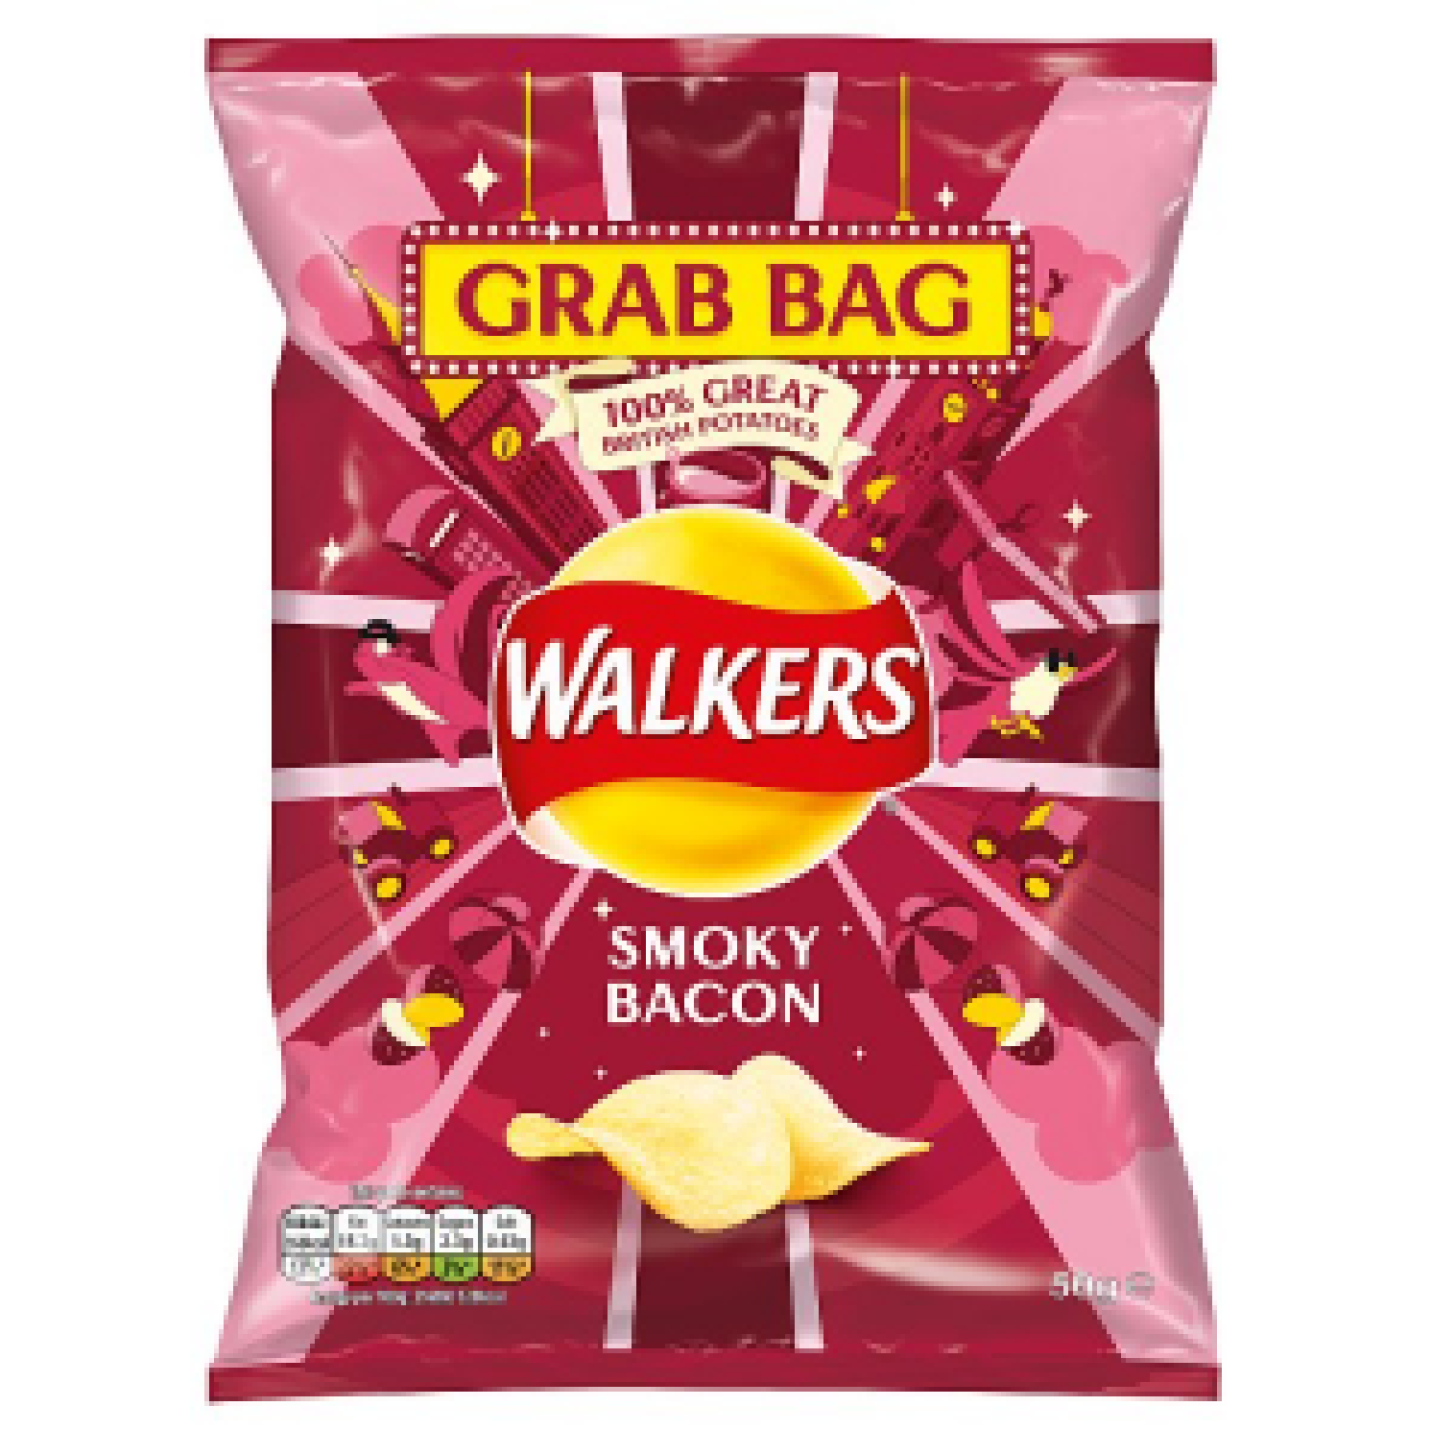 Walkers Smoky Bacon 50g